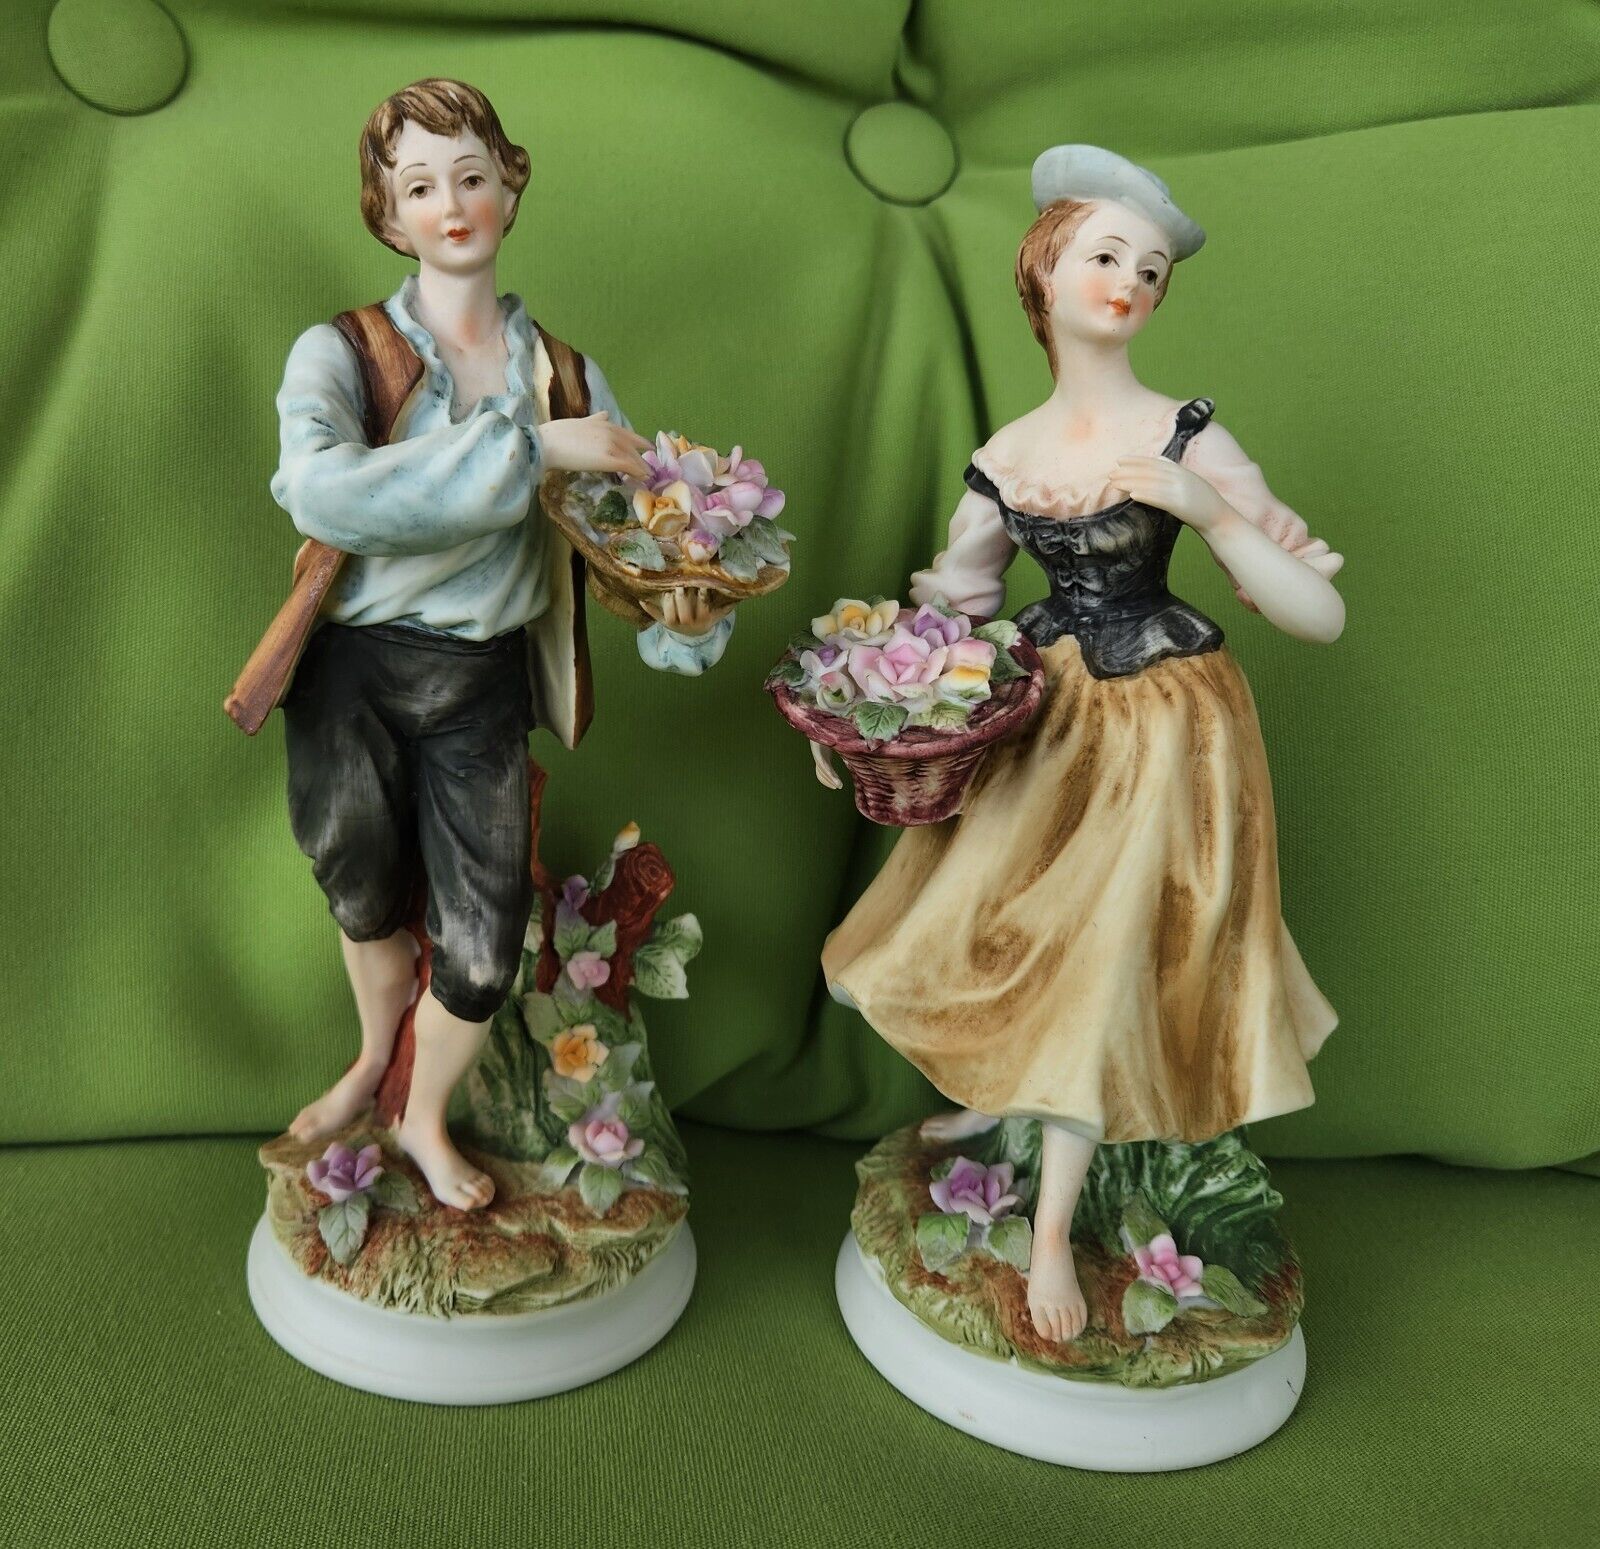 Vintage Capodimonte Style figurine couple Girl and boy with flowers baskets 8 in